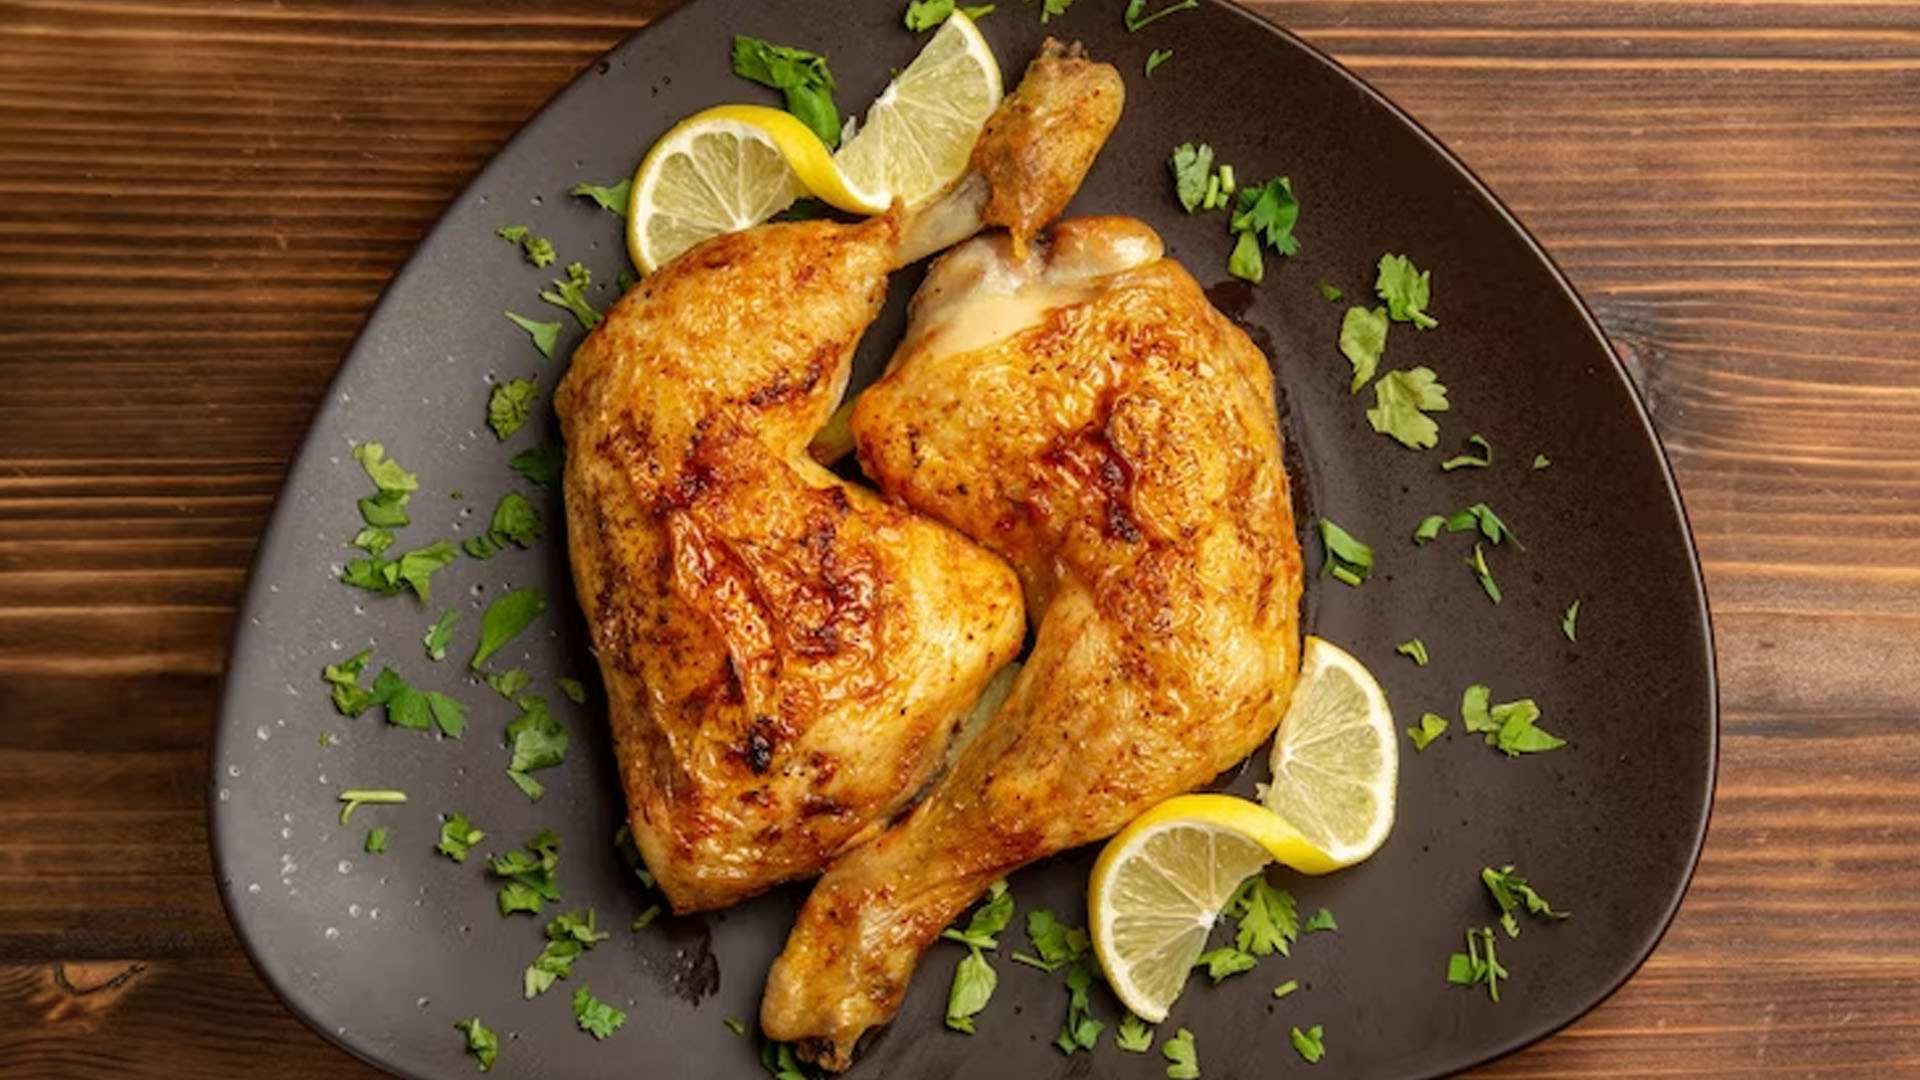 What Are The Health Benefits of Eating Chicken?